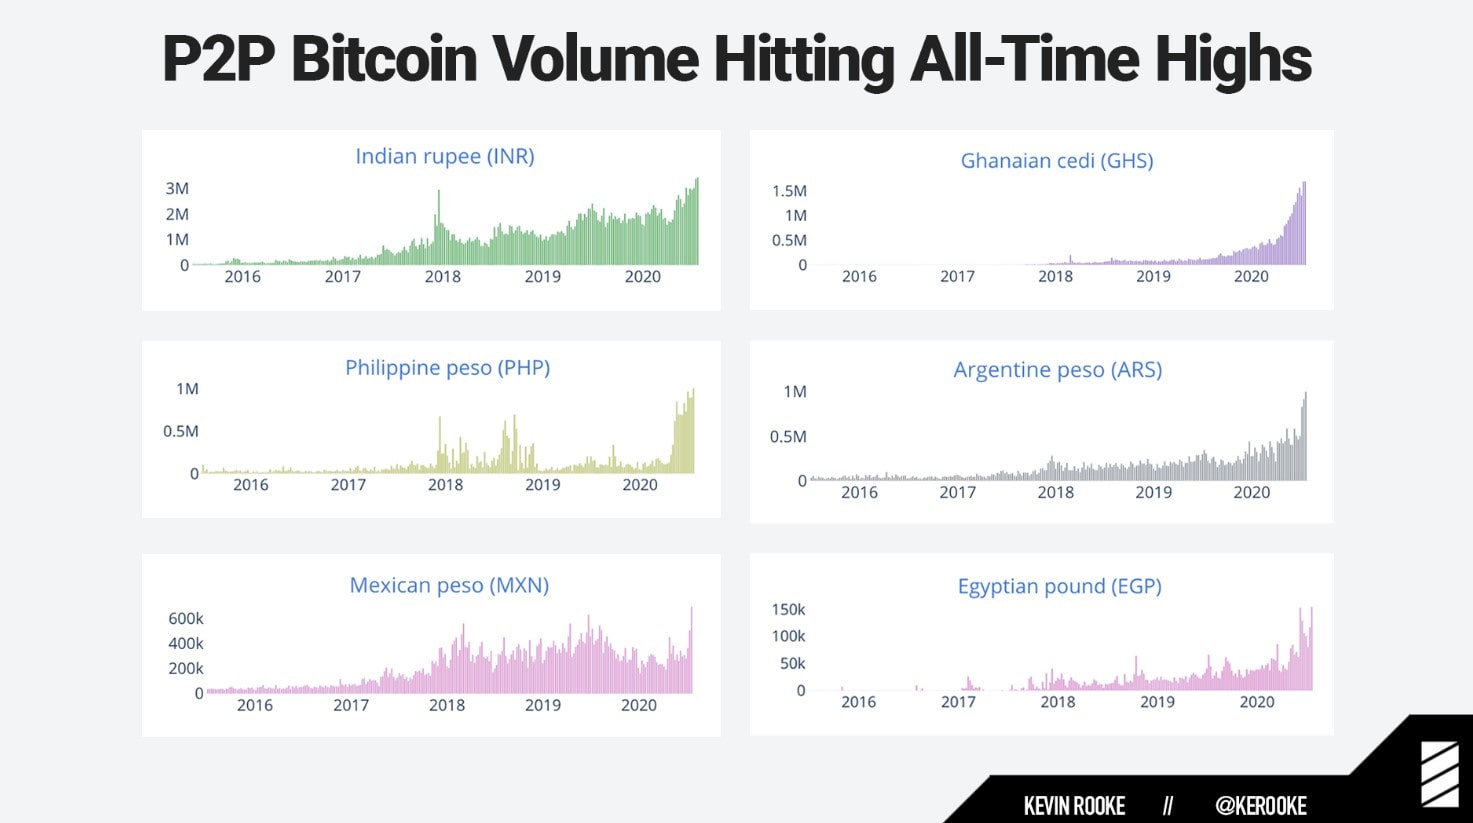 Bitcoin P2P Volume Hits ATH in India, Ghana, and Mexico